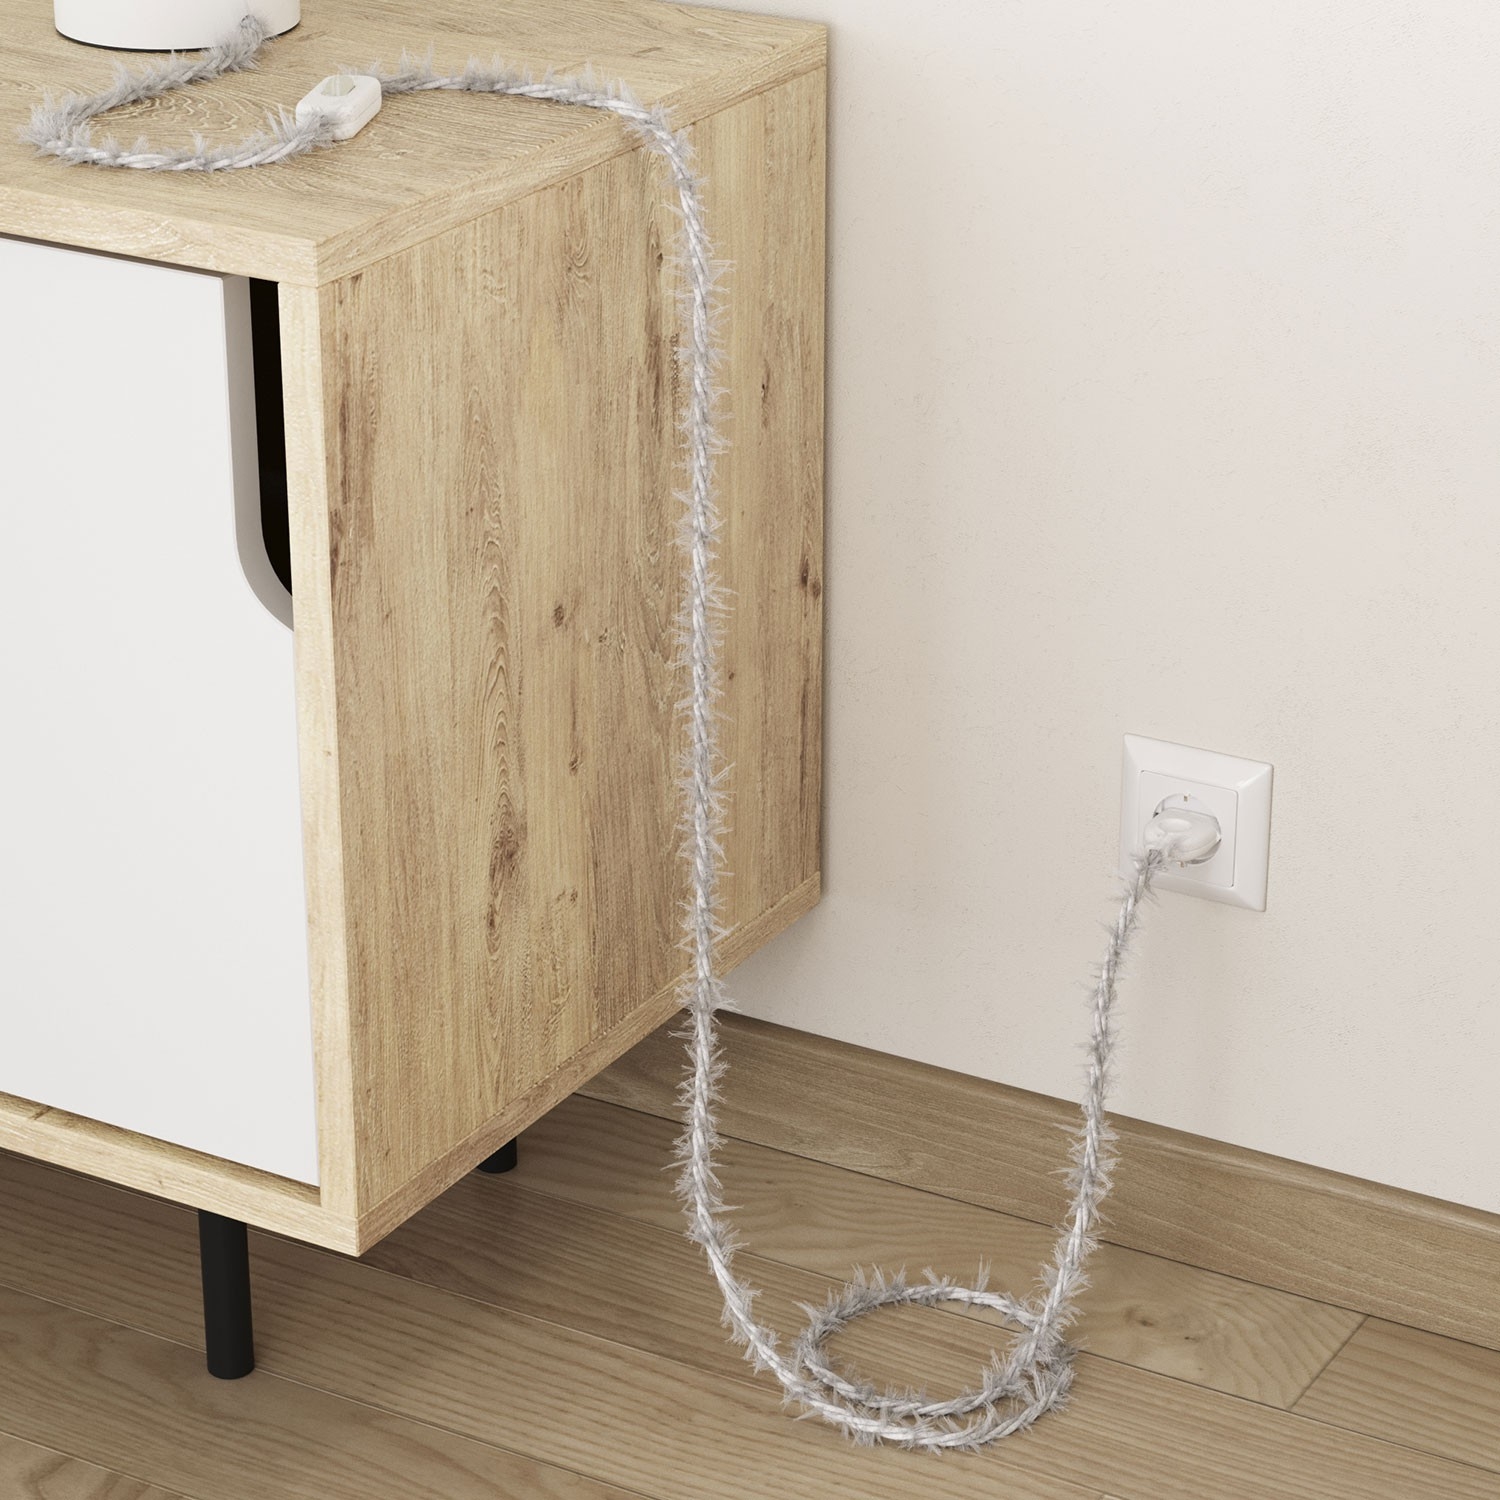 TP01 Plain White Marlene twisted lighting cable covered in hairy-effect fabric